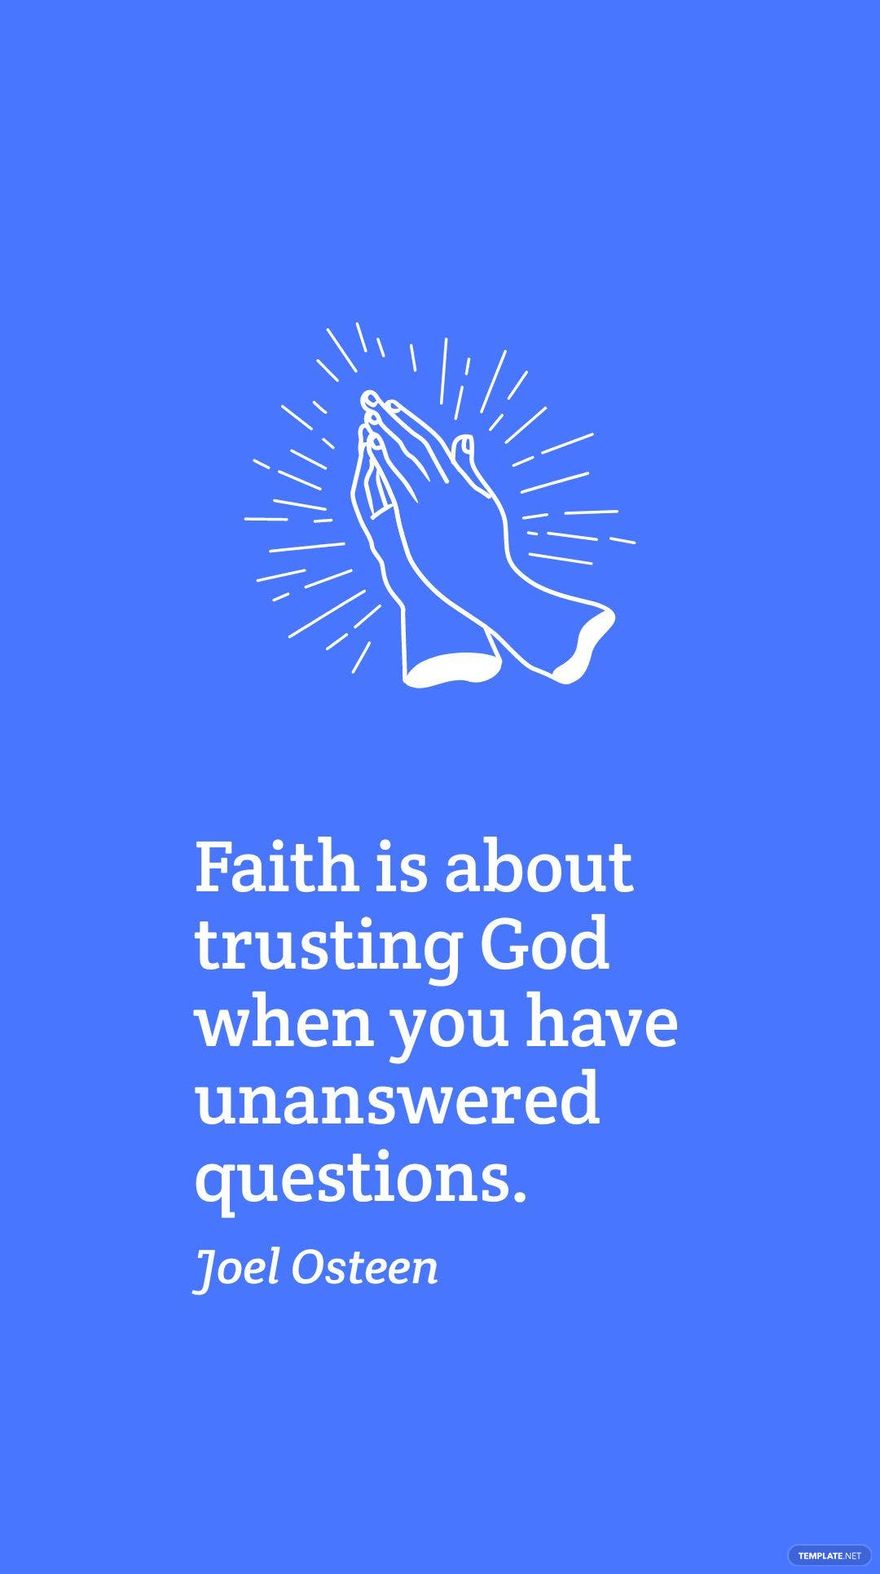 Joel Osteen - Faith is about trusting God when you have unanswered questions. in JPG